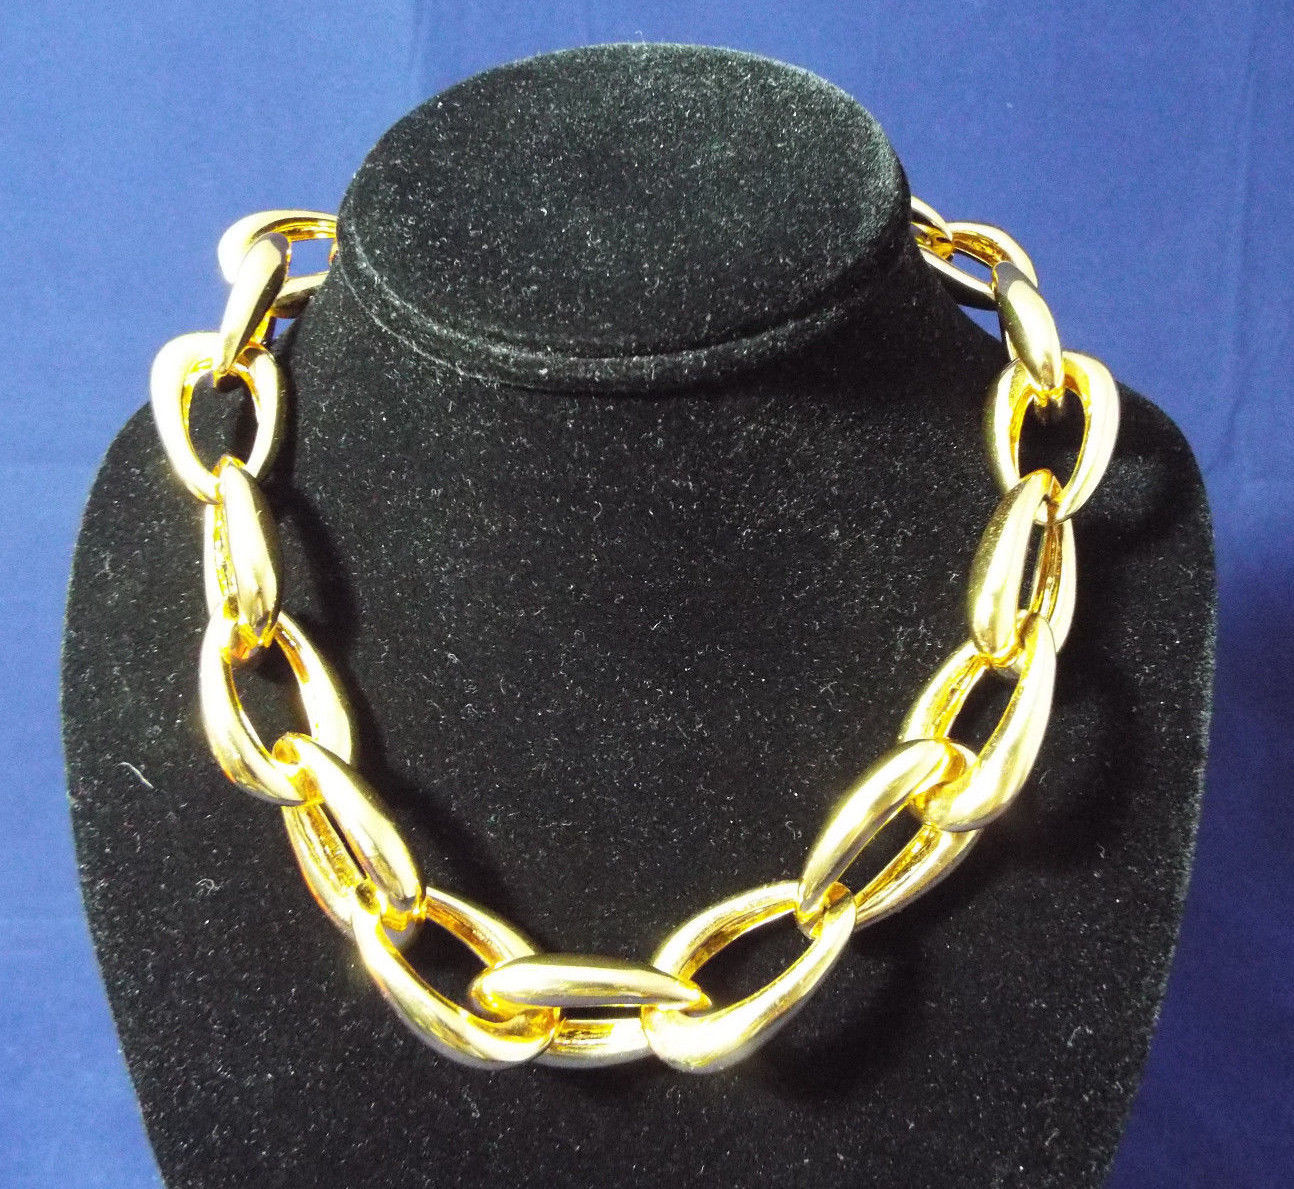 Signed Vince Camuto Adjustable Heavy 17 Inch Gold Tone Necklace Toggle Closure - $89.99